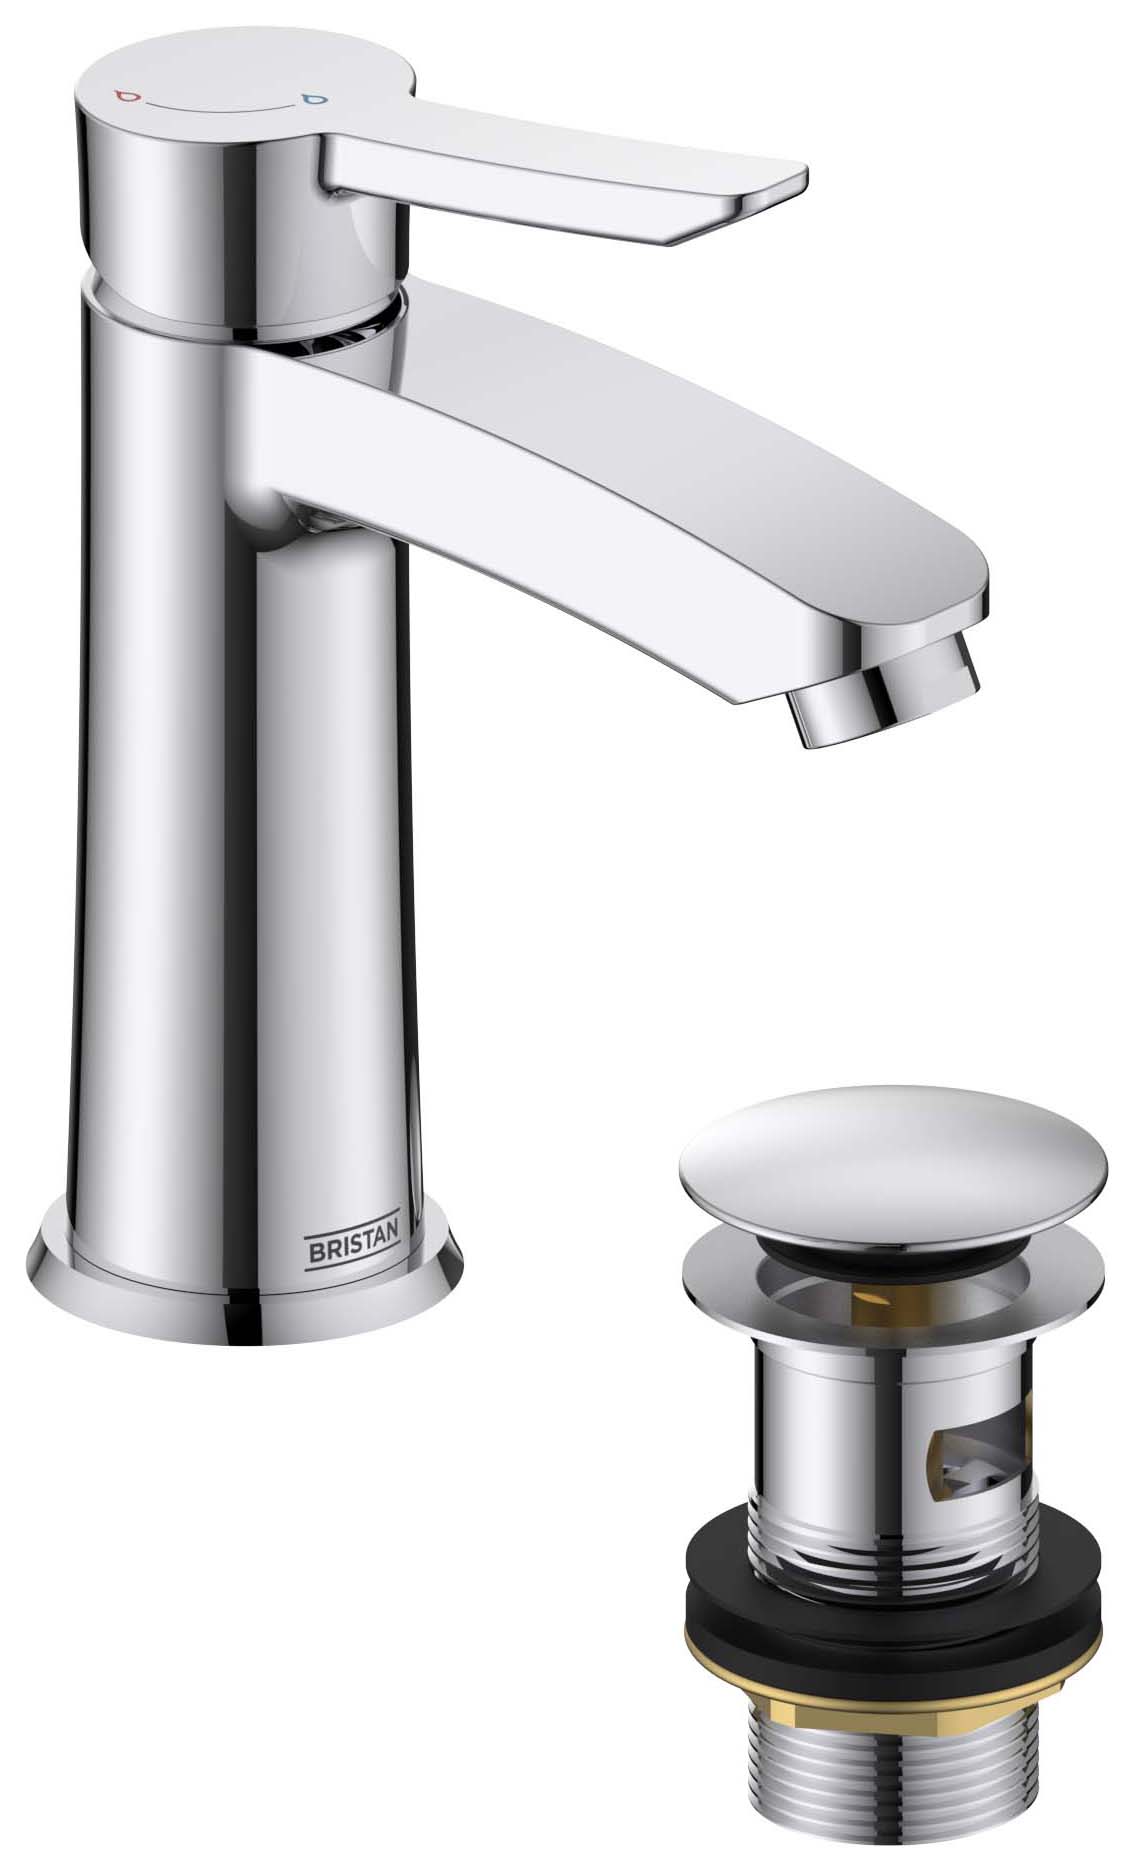 Image of Bristan Apelo Eco Start Basin Mixer Tap with Clicker Waste - Chrome